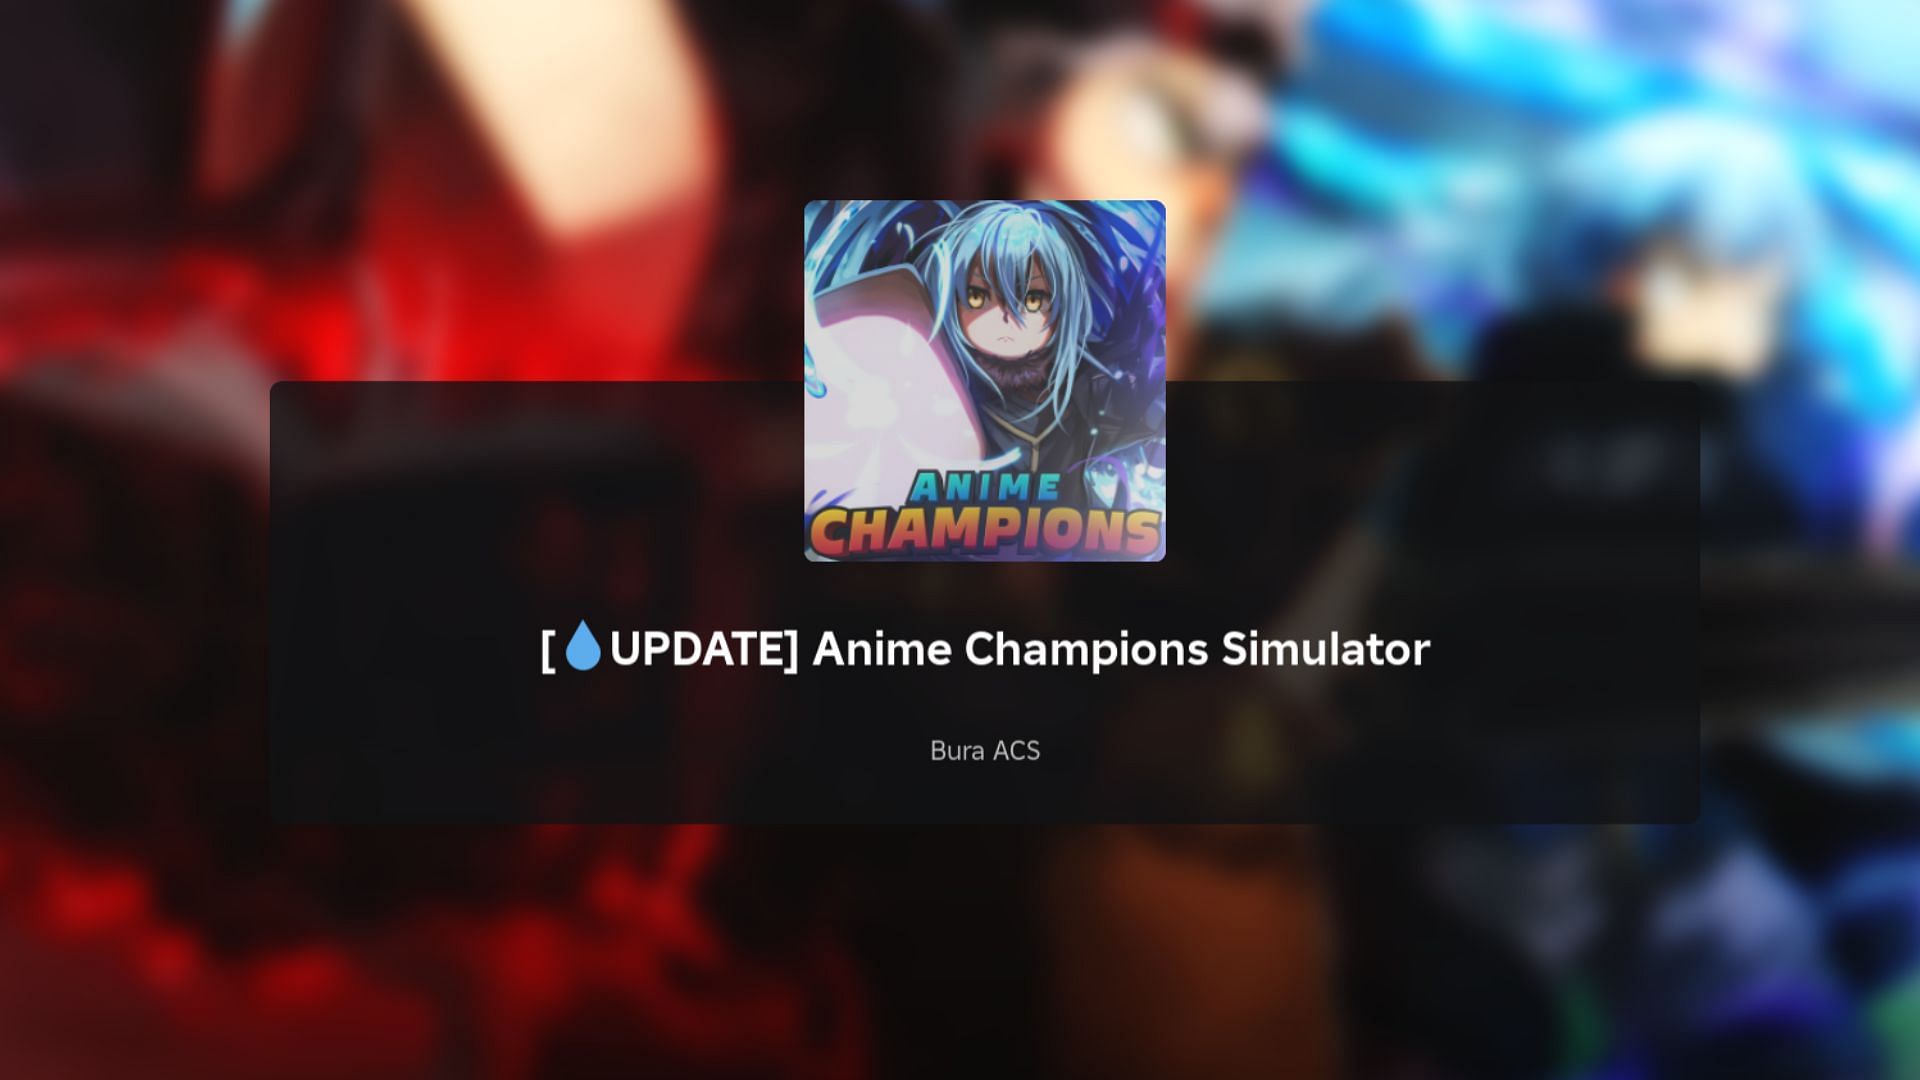 Anime Champions Simulator offers exciting gameplay (Image via Roblox)